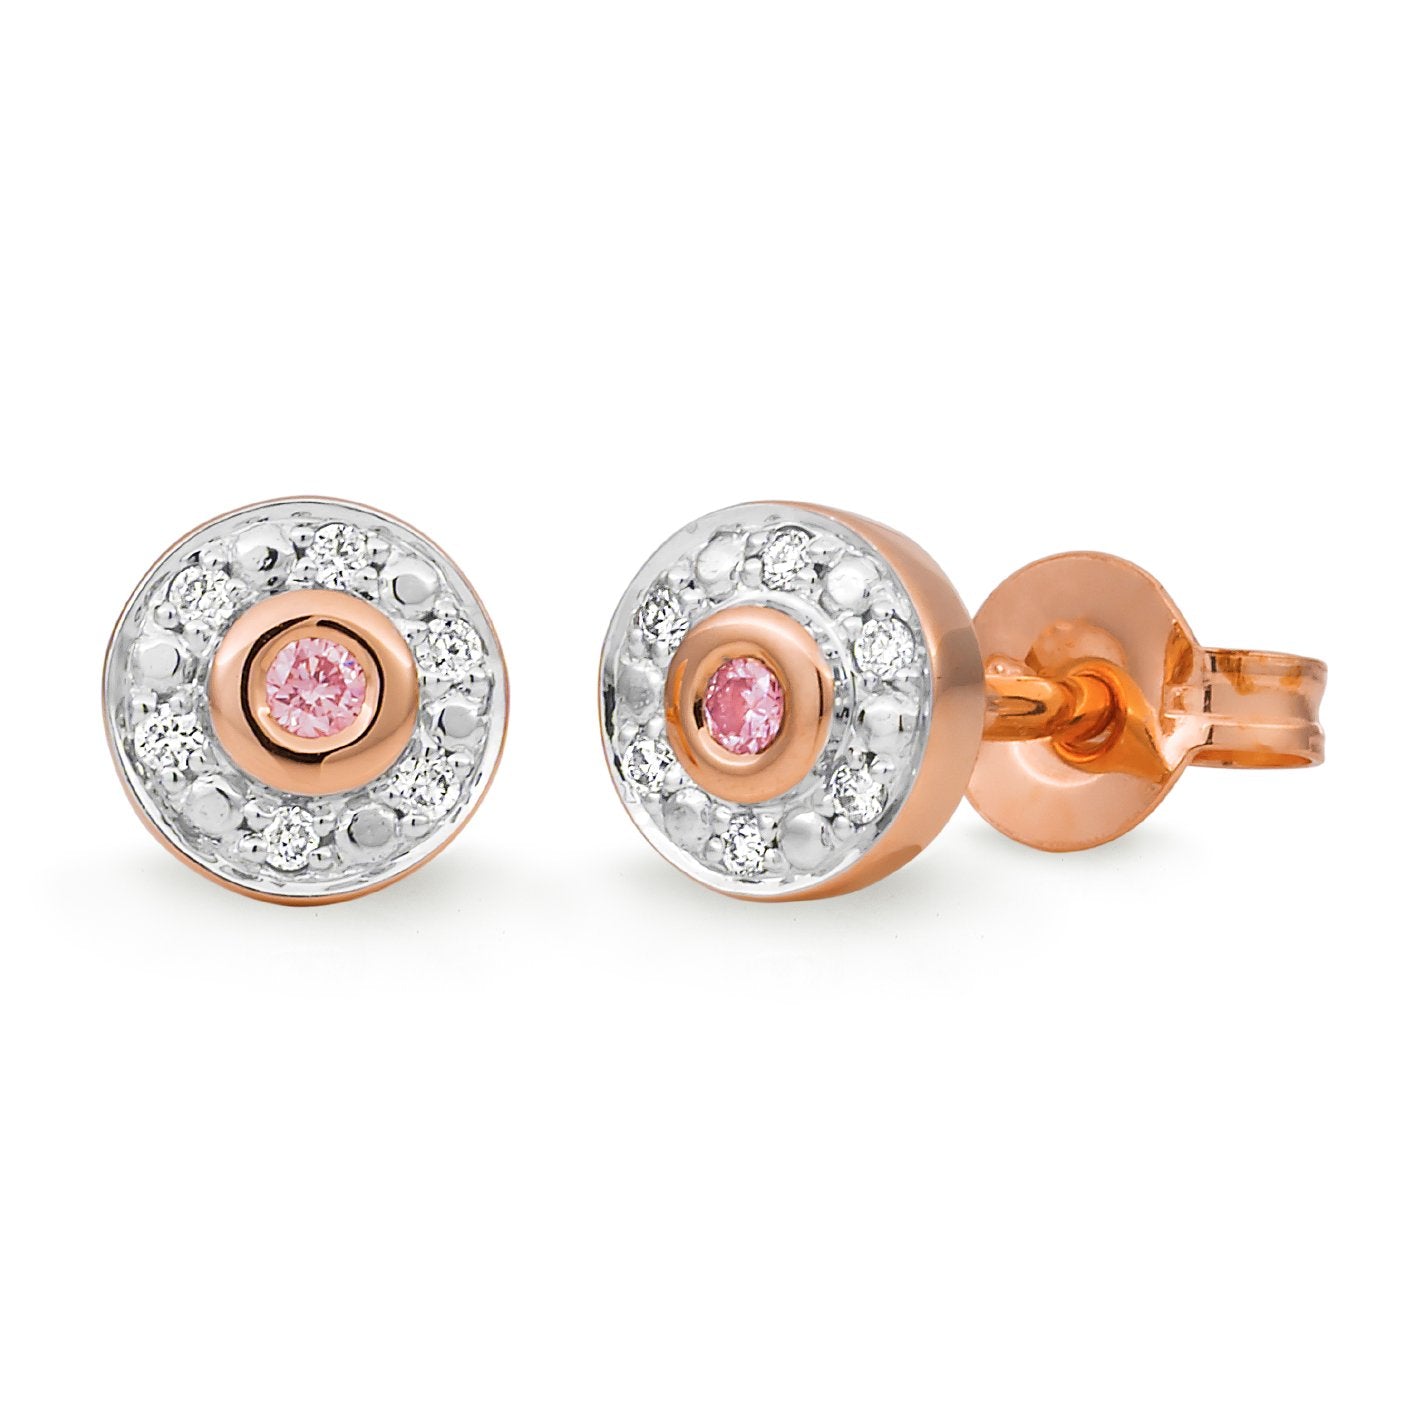 9ct Rose and White Gold Diamond and Pink Diamond stud earrings